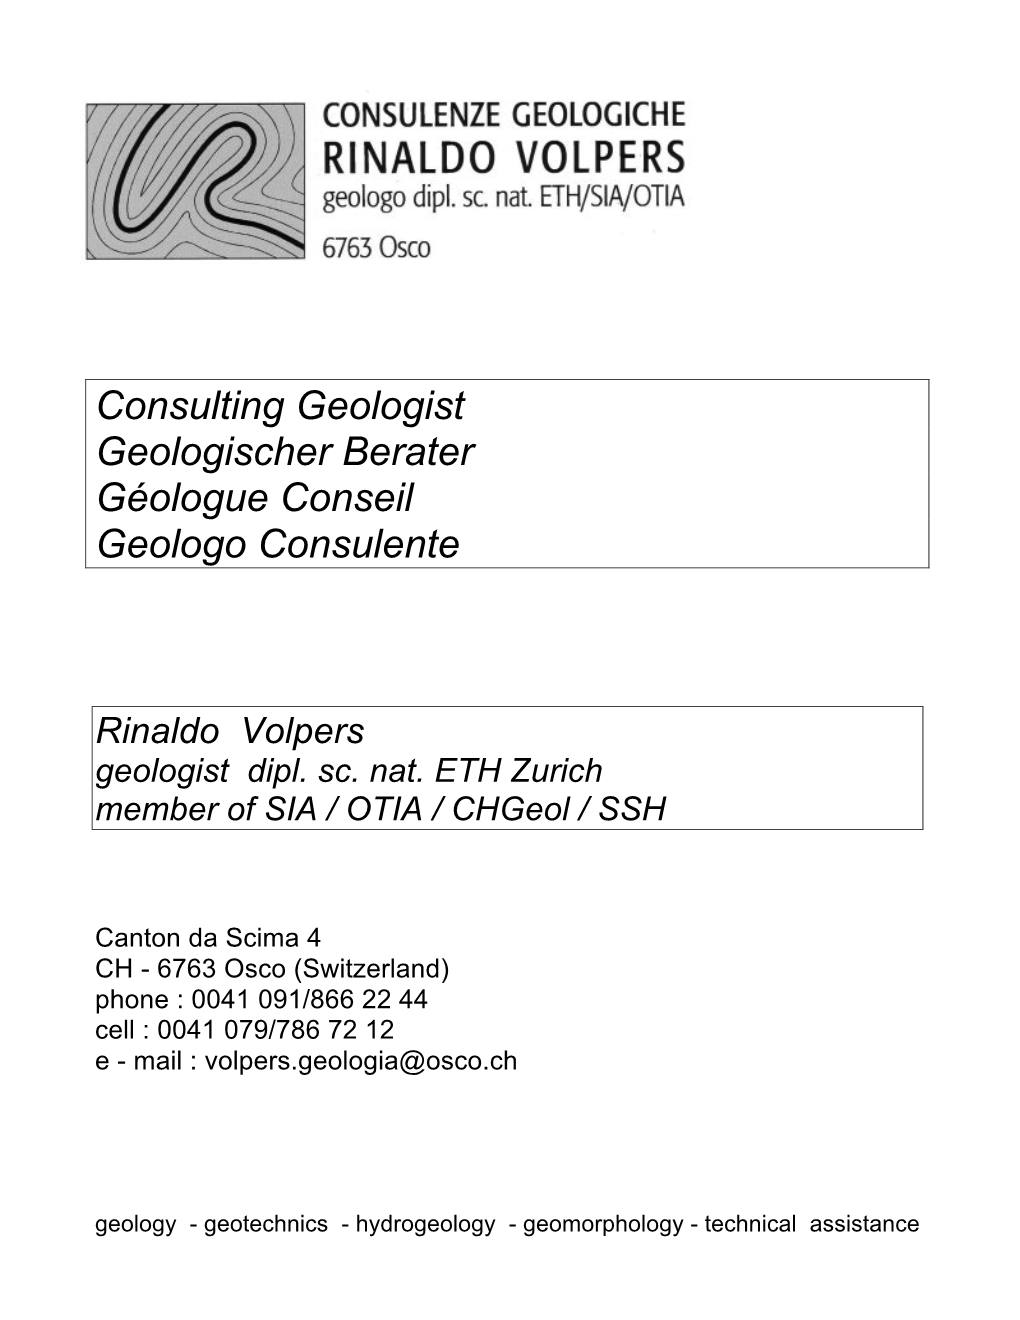 Consulting Geologist Geologischer Berater Géologue Conseil Geologo Consulente